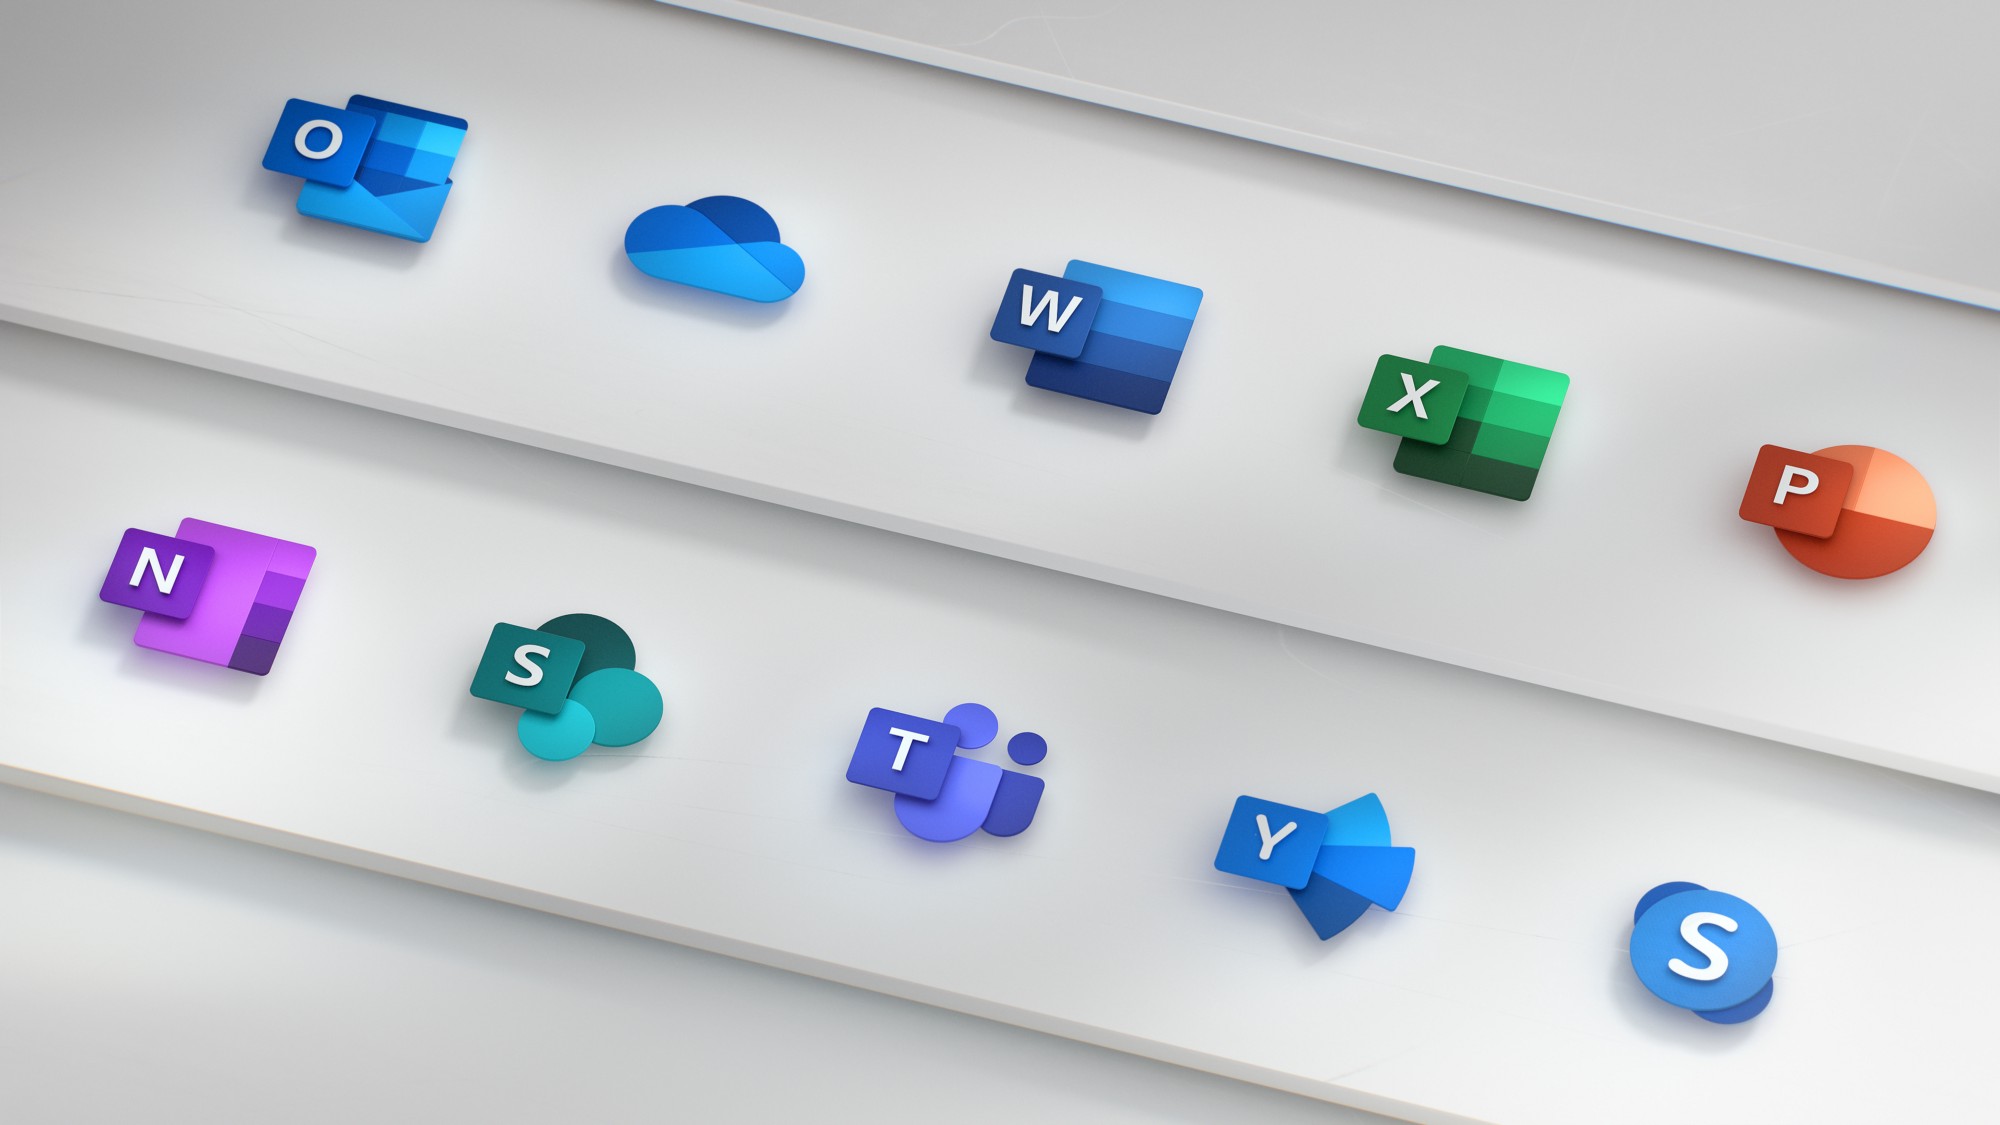 office-icons